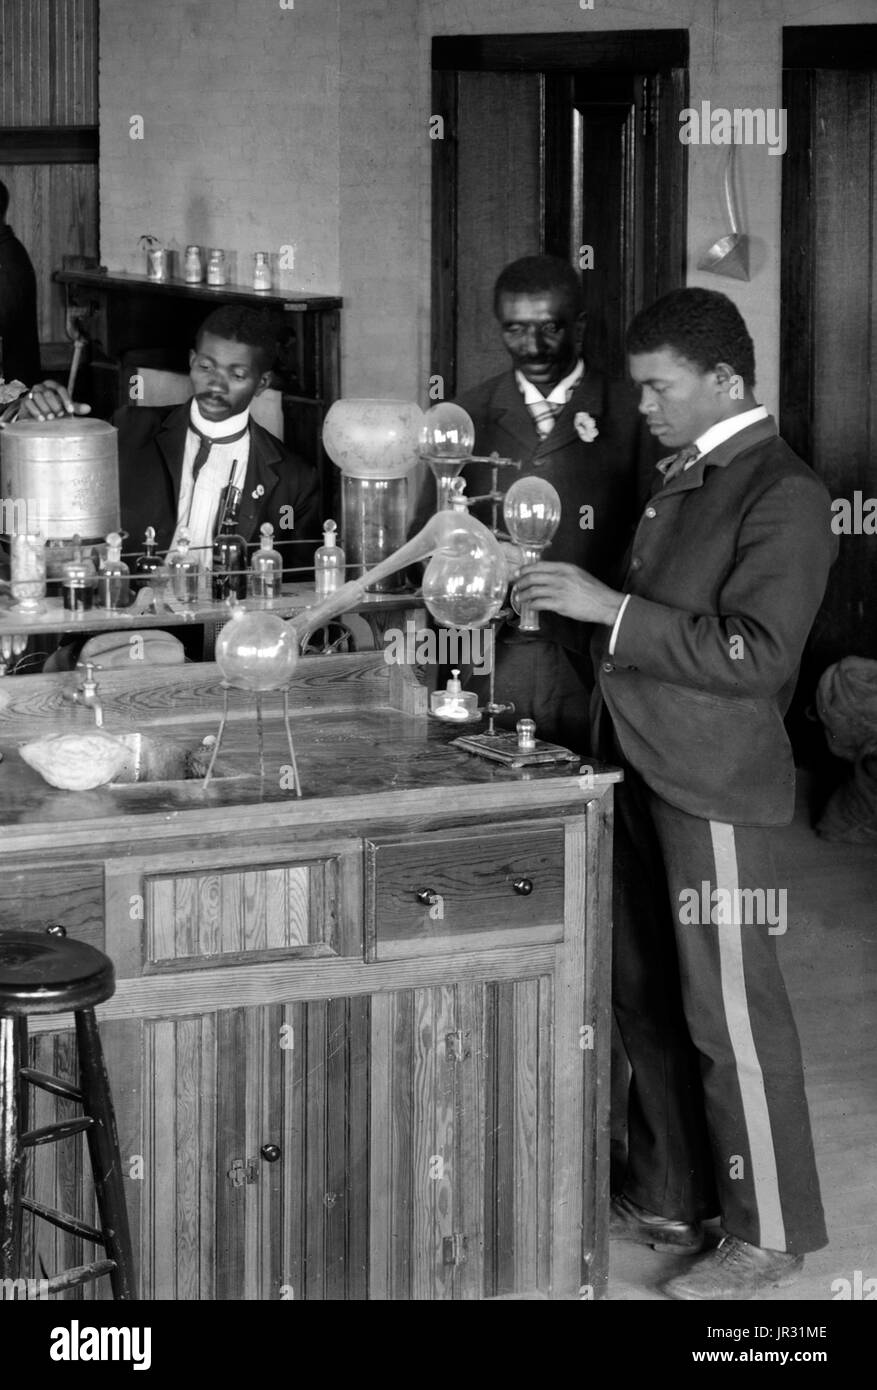 Chemistry laboratory/classroom with students at the Tuskegee Institute, Tuskegee, Alabama. George Washington Carver stands second from right, facing front (framed by doorway). George Washington Carver (1864 - January 5, 1943) was an African-American scientist, botanist, educator, and inventor born into slavery. In 1891 he attended and studied botany at Iowa State Agricultural College where he was the first black student, and later taught as the first black faculty member. His reputation is based on his research into and promotion of alternative crops to cotton, such as peanuts, soybeans and sw Stock Photo